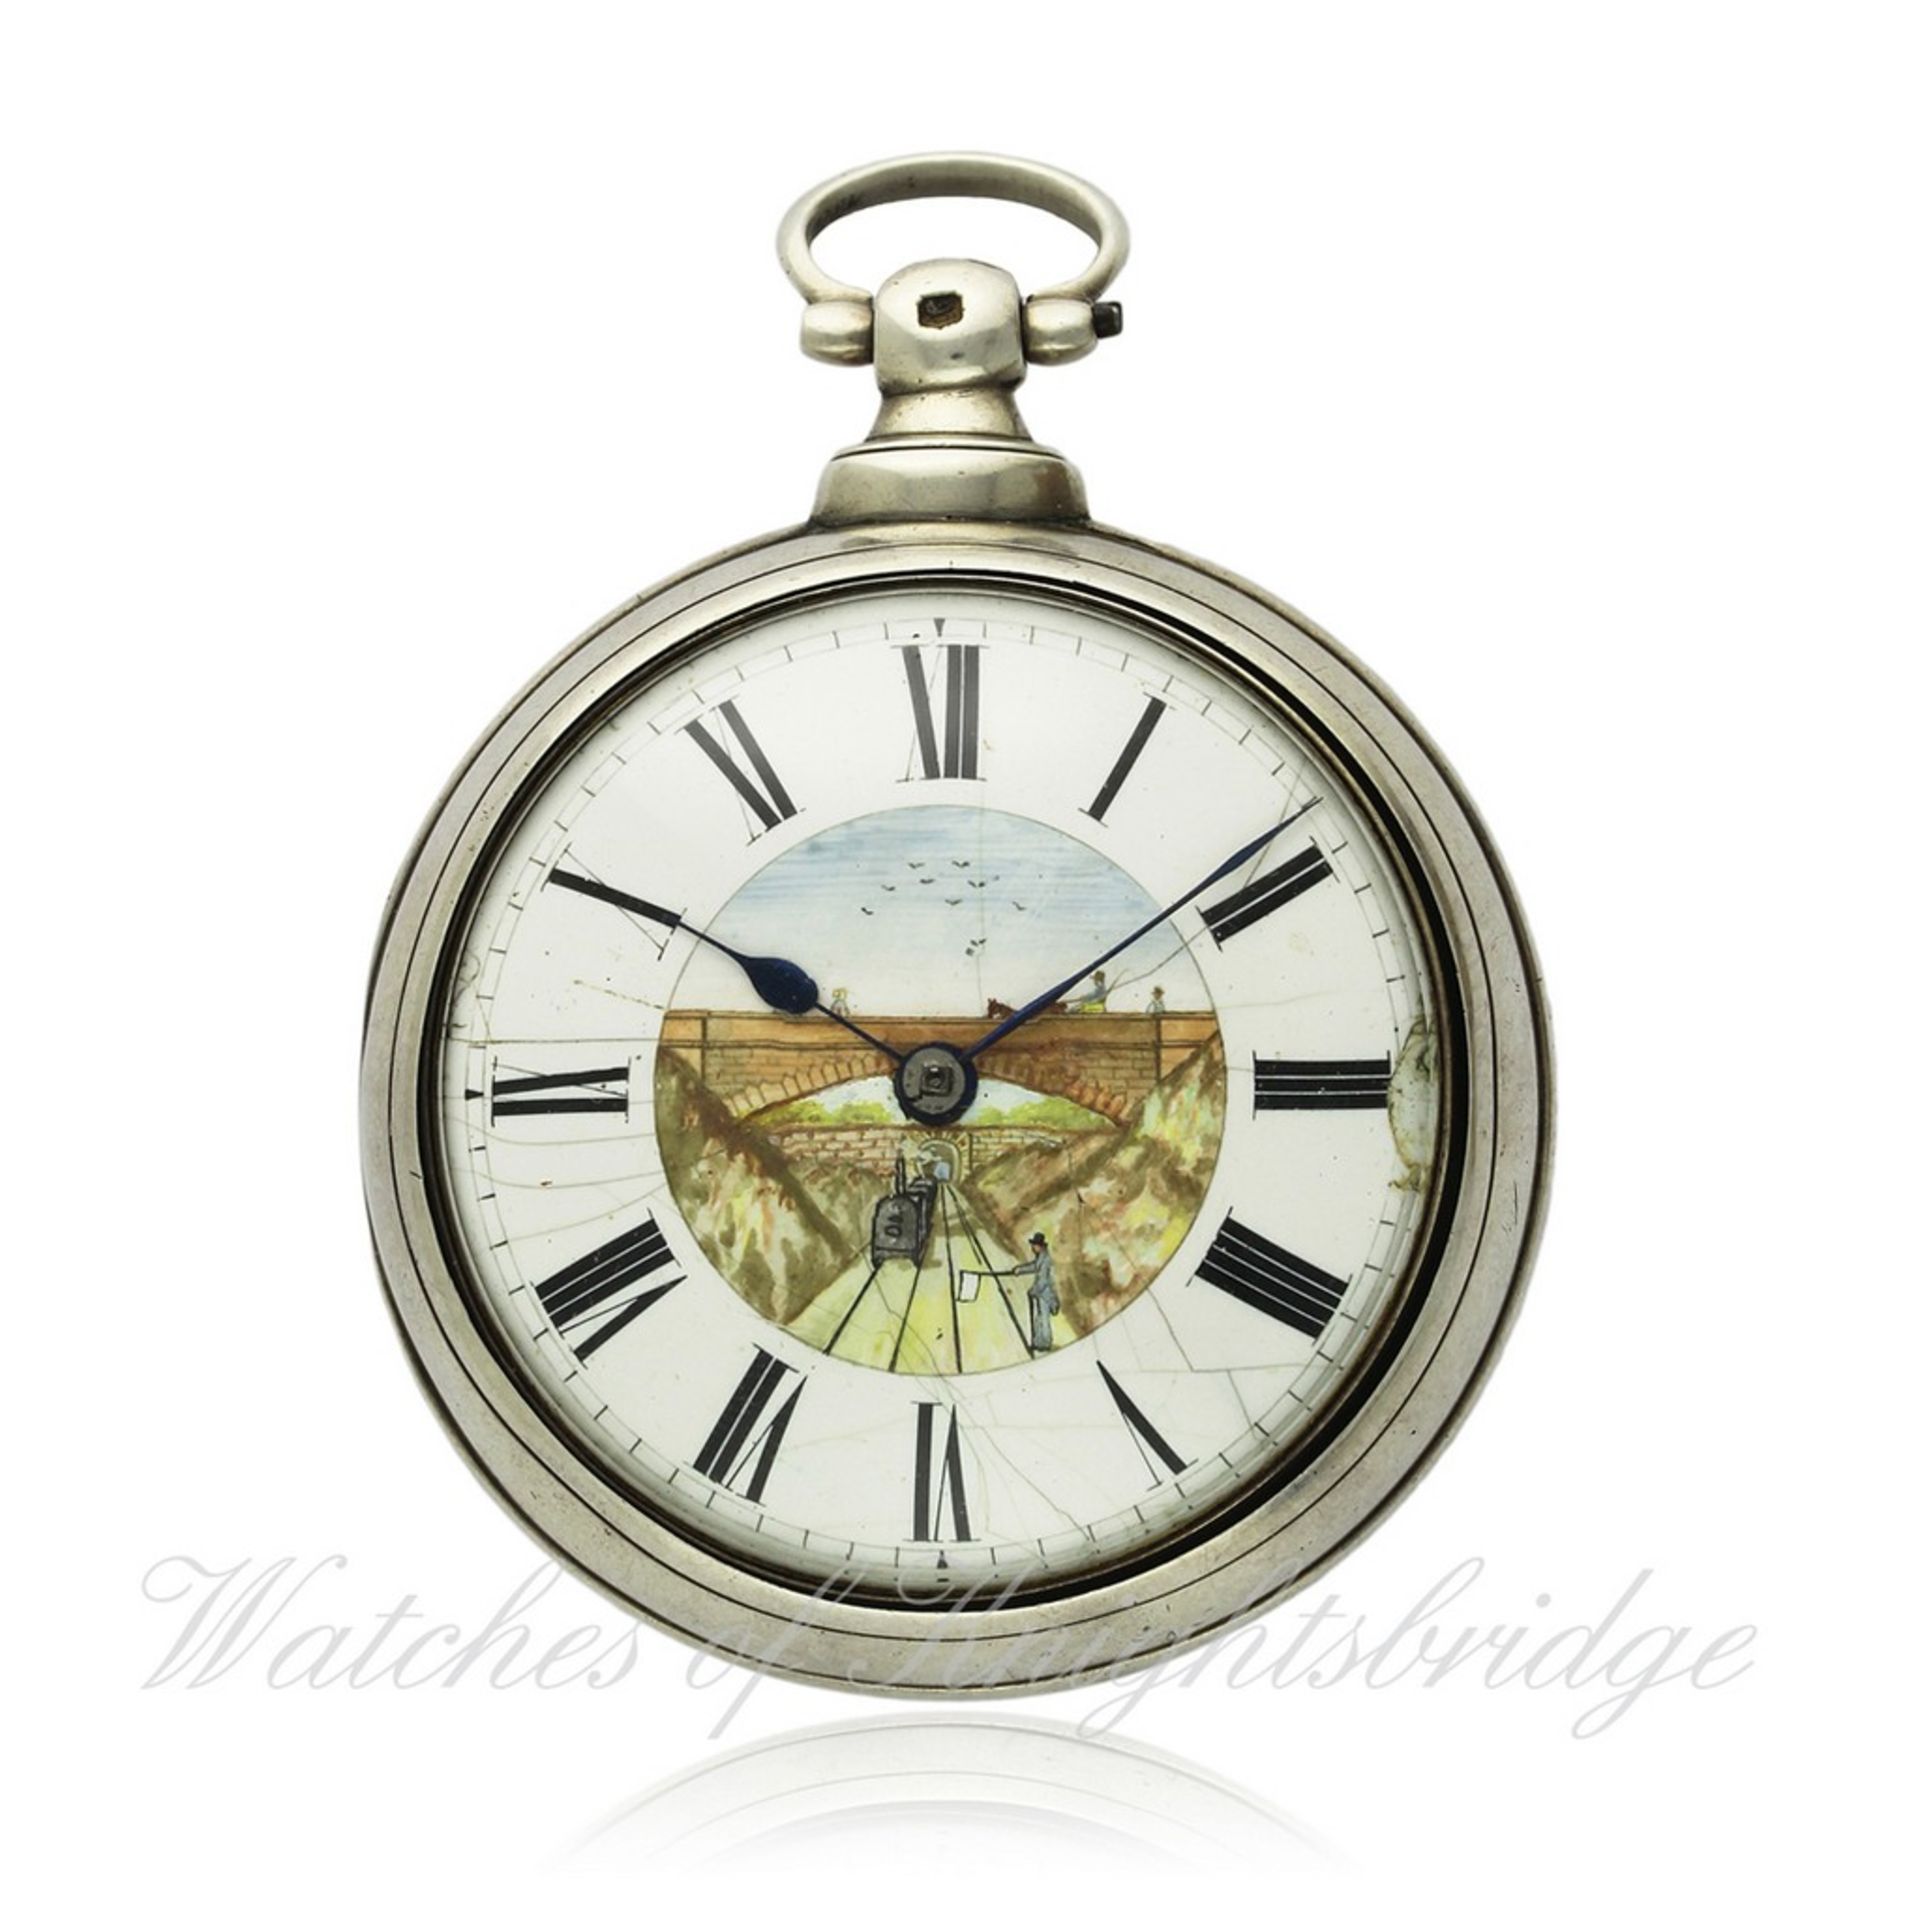 A GENTLEMAN`S SOLID SILVER PAIR CASED FUSEE VERGE POCKET WATCH CIRCA 1820 D: Enamel dial with a